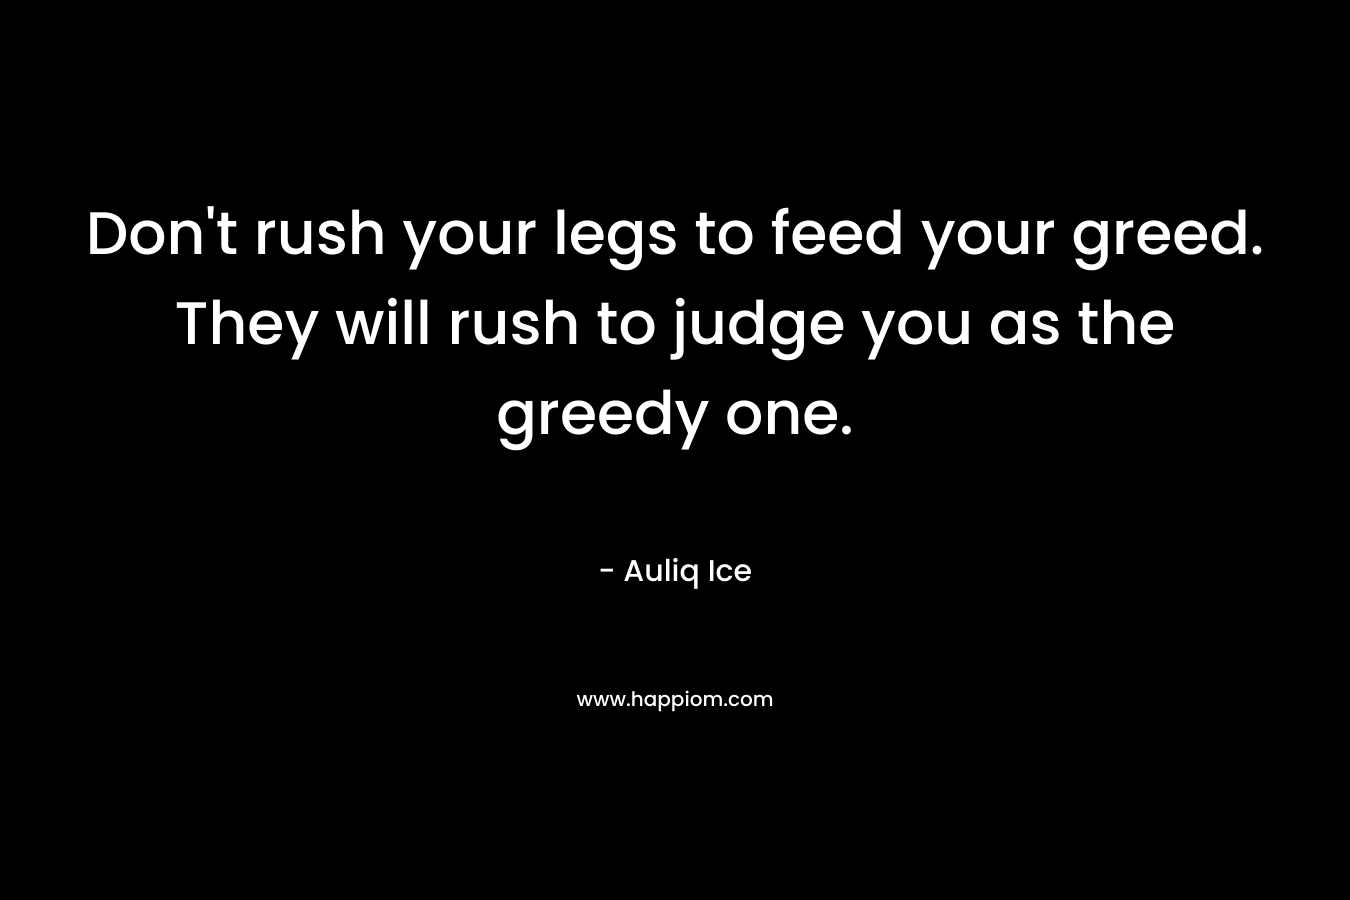 Don’t rush your legs to feed your greed. They will rush to judge you as the greedy one. – Auliq Ice